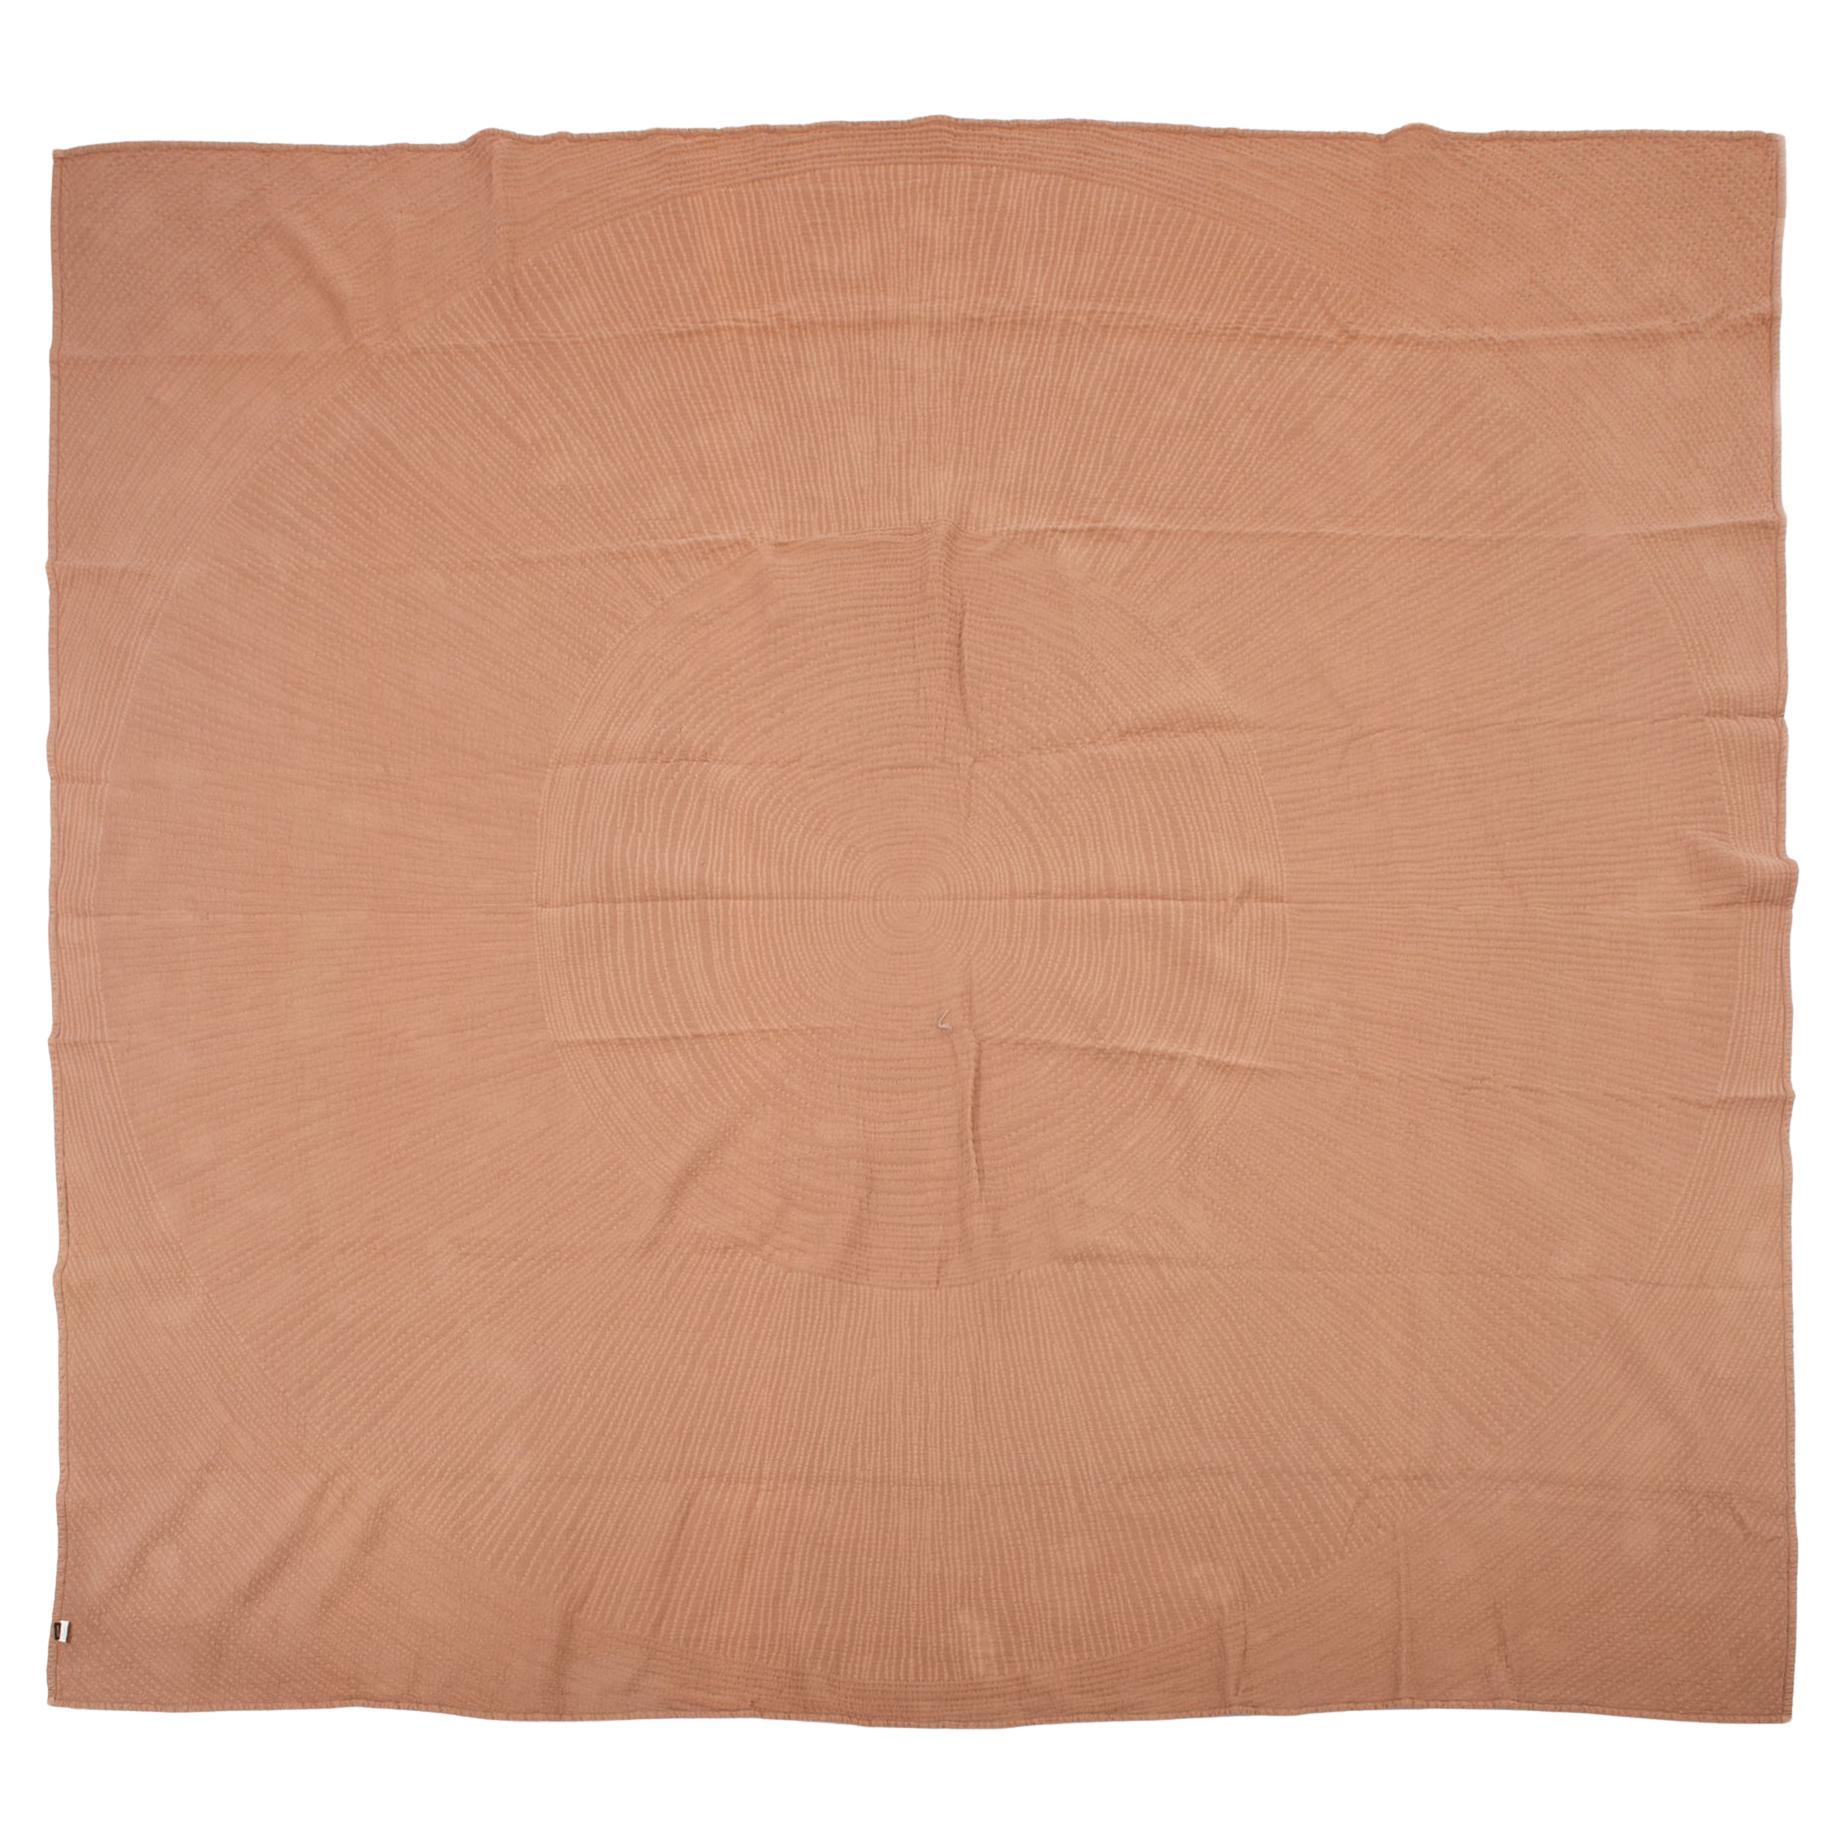 Other Quilted Taupe Cotton  Bedspread or Bedcover  For Sale